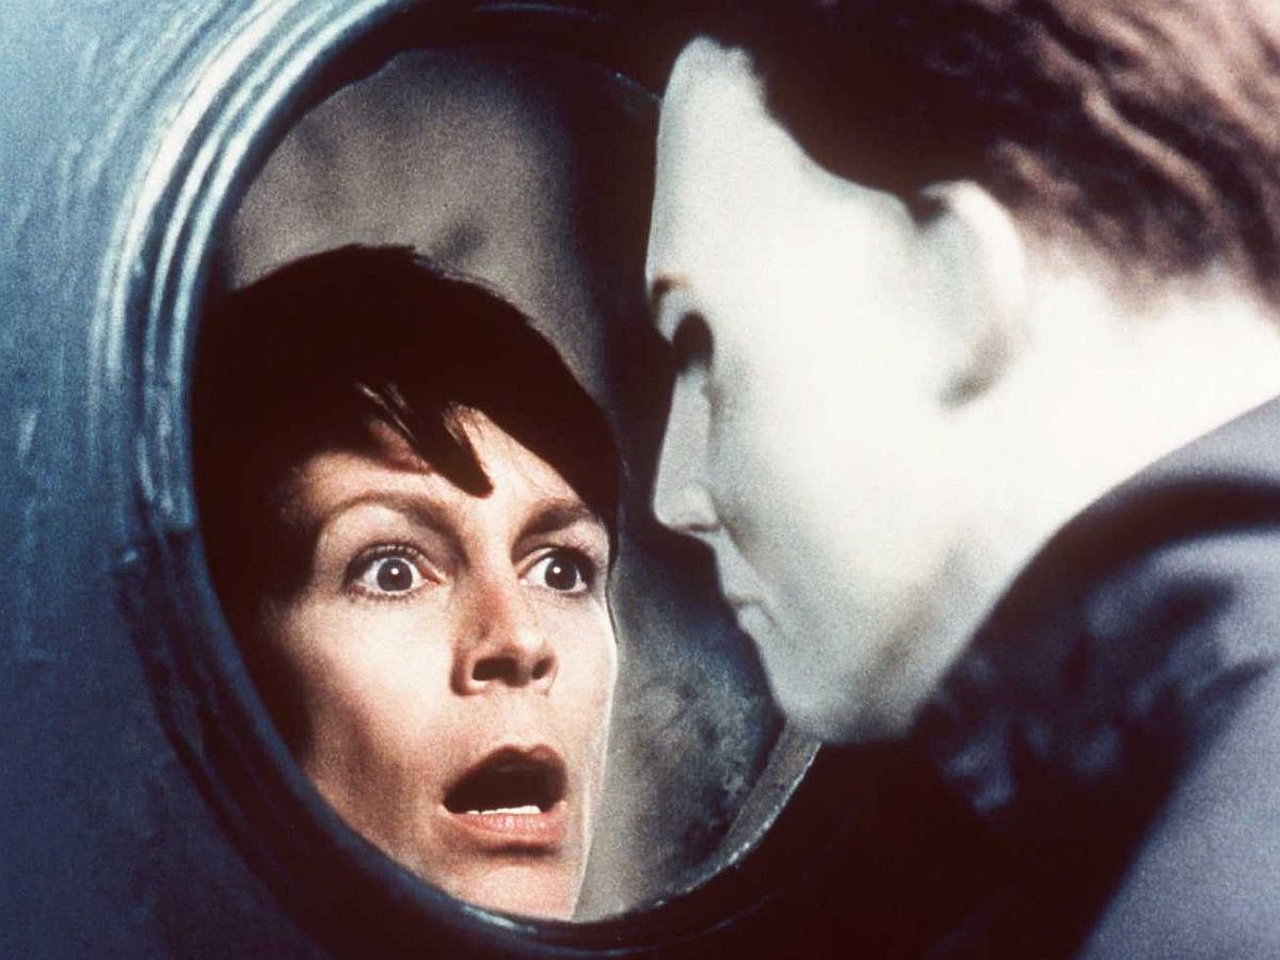 movie, halloween h20: 20 years later, michael myers